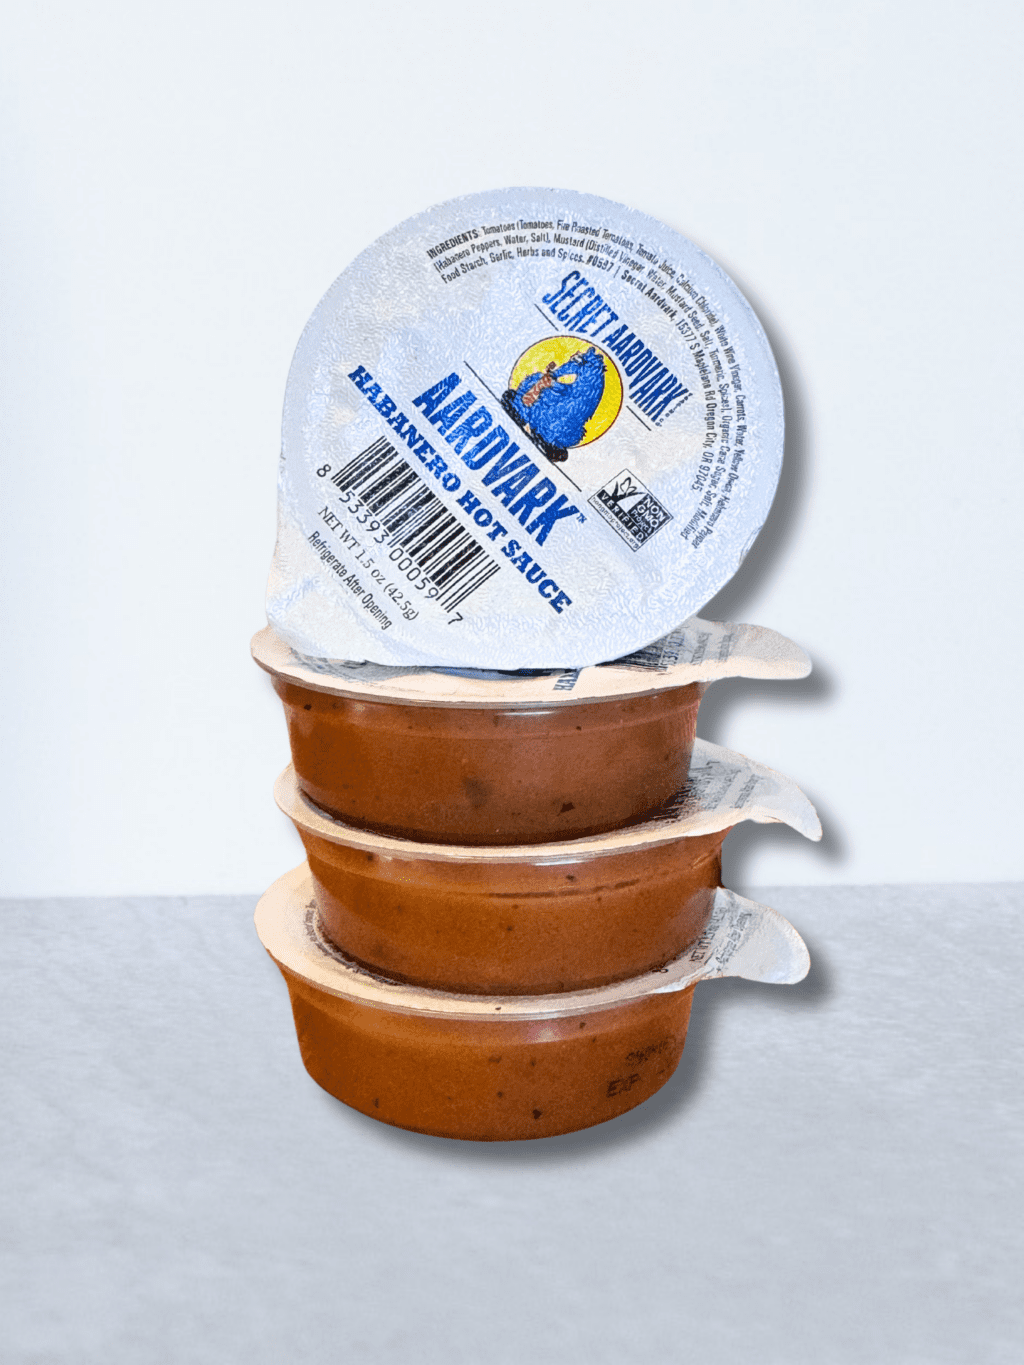 stack of 3 dipping cupr with a fourth on top. Featuring the Aardvark Habanero 1.5 oz cup.